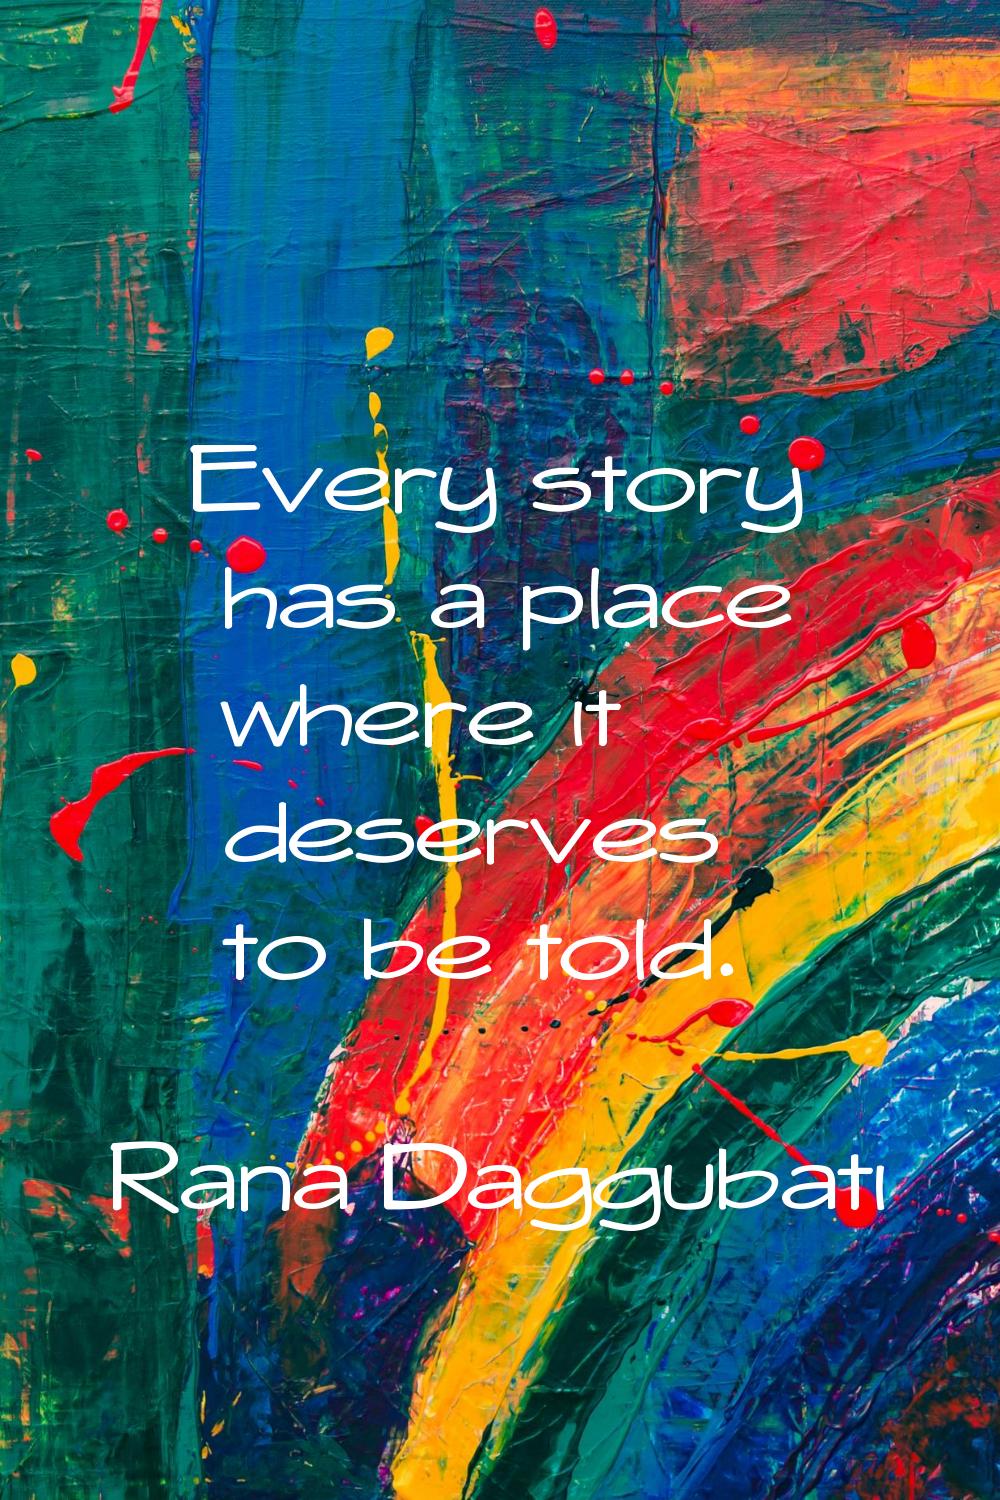 Every story has a place where it deserves to be told.